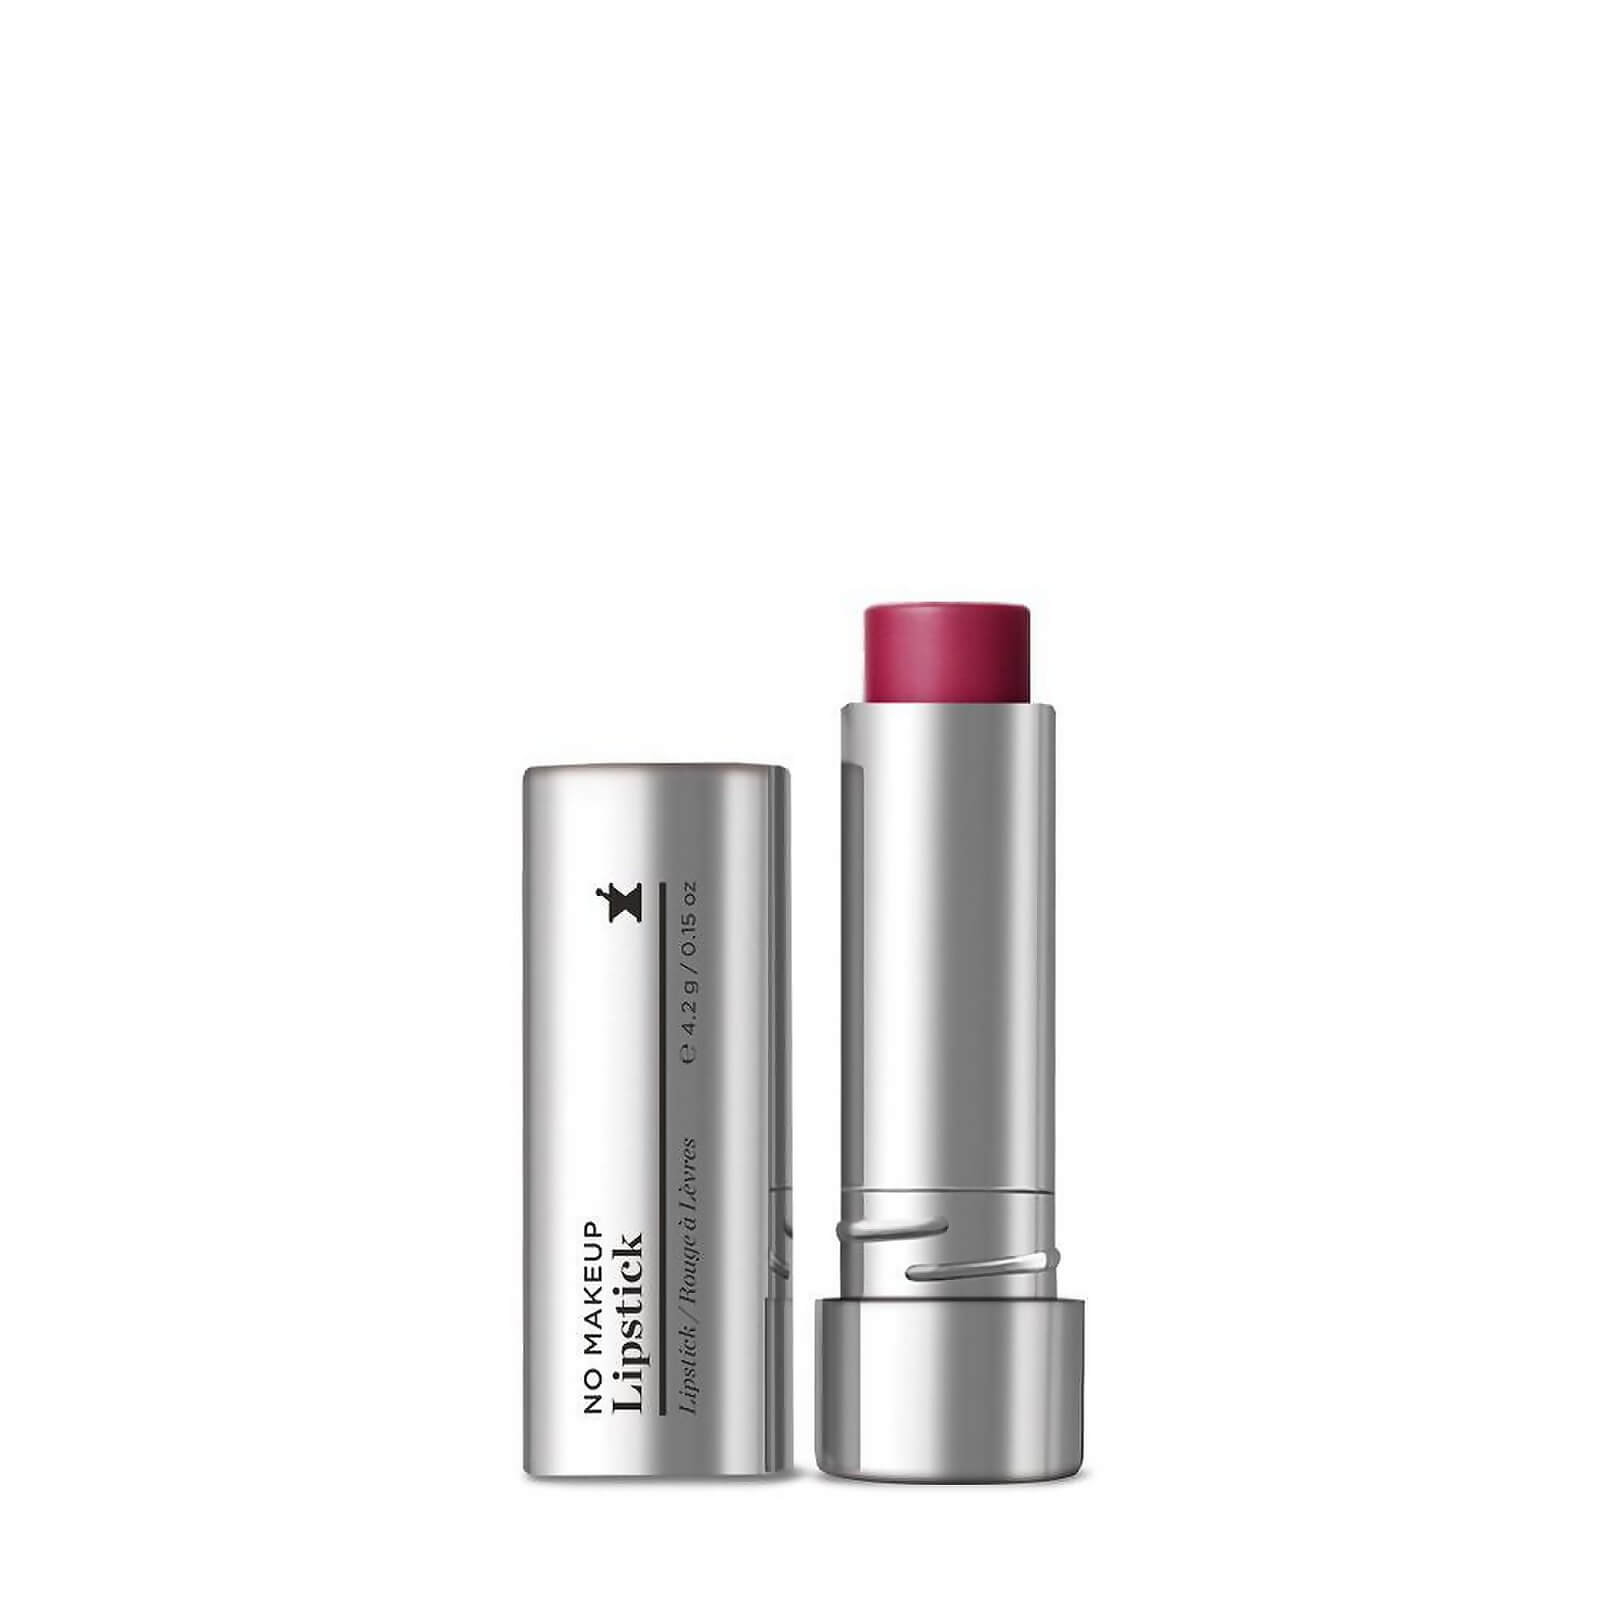 Perricone MD No Makeup Lipstick SPF 15 4.2g (Various Shades) - 4 Red